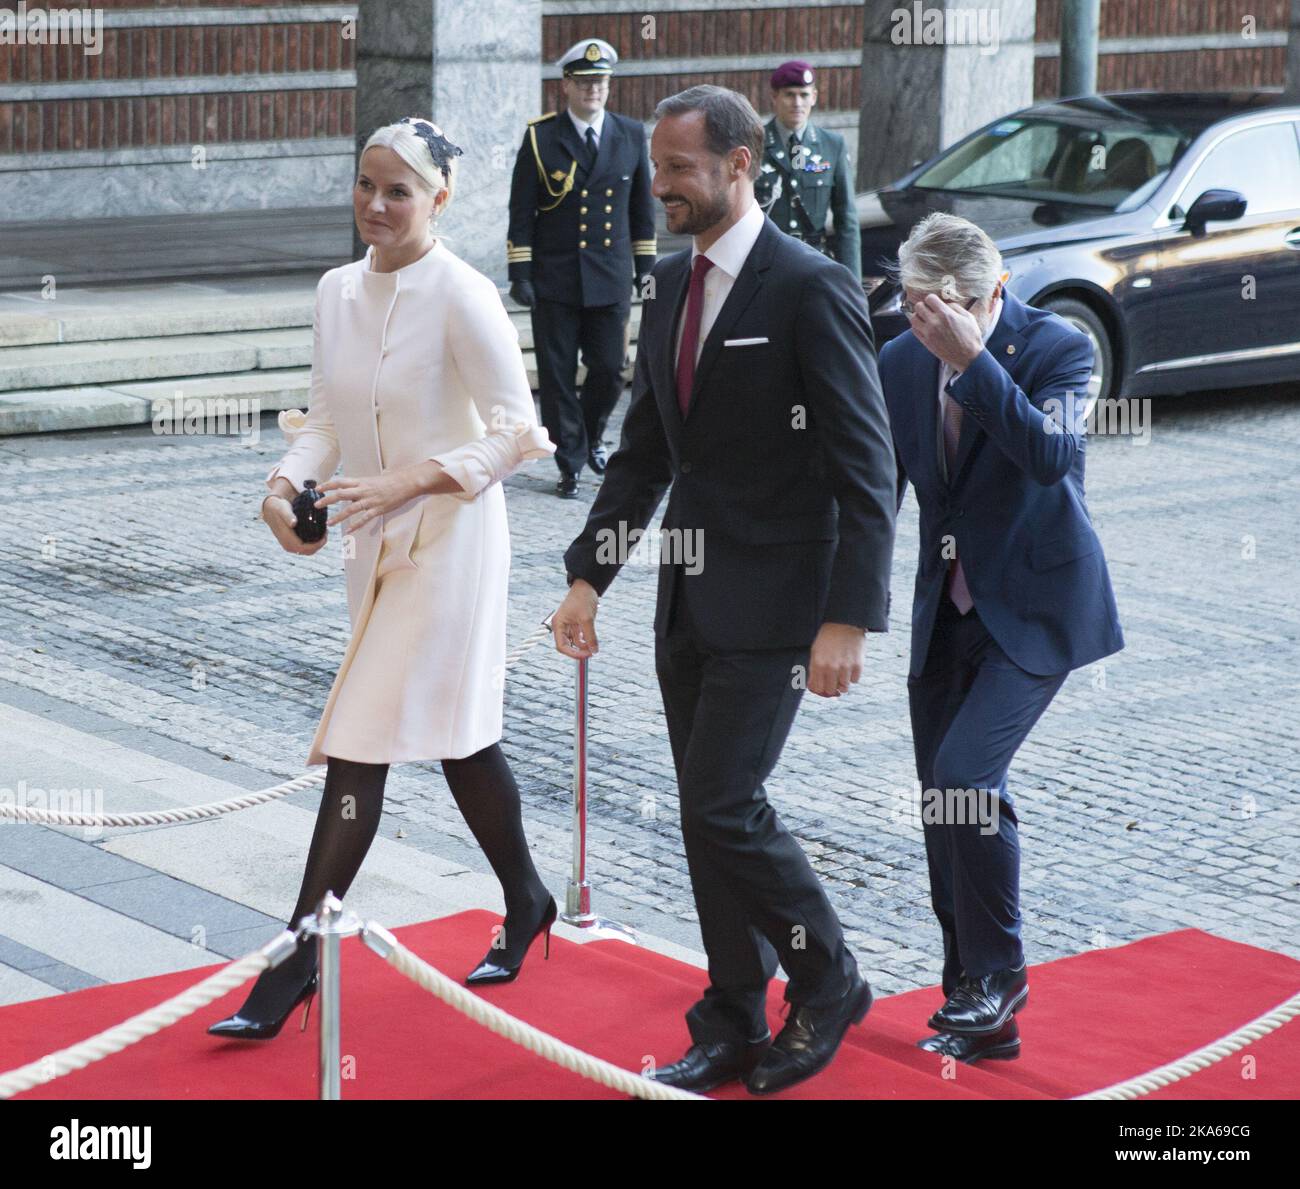 Oslo 20141210. Nobel Peace Prize 2014. The Royal Family arrive Town Hall to attend the ceremony Wednesday. From left: Crown Princess Mette-Marit, Crown Prince Haakon and Mayor Fabian Stang. Photo: Torstein Boe/ Stock Photo